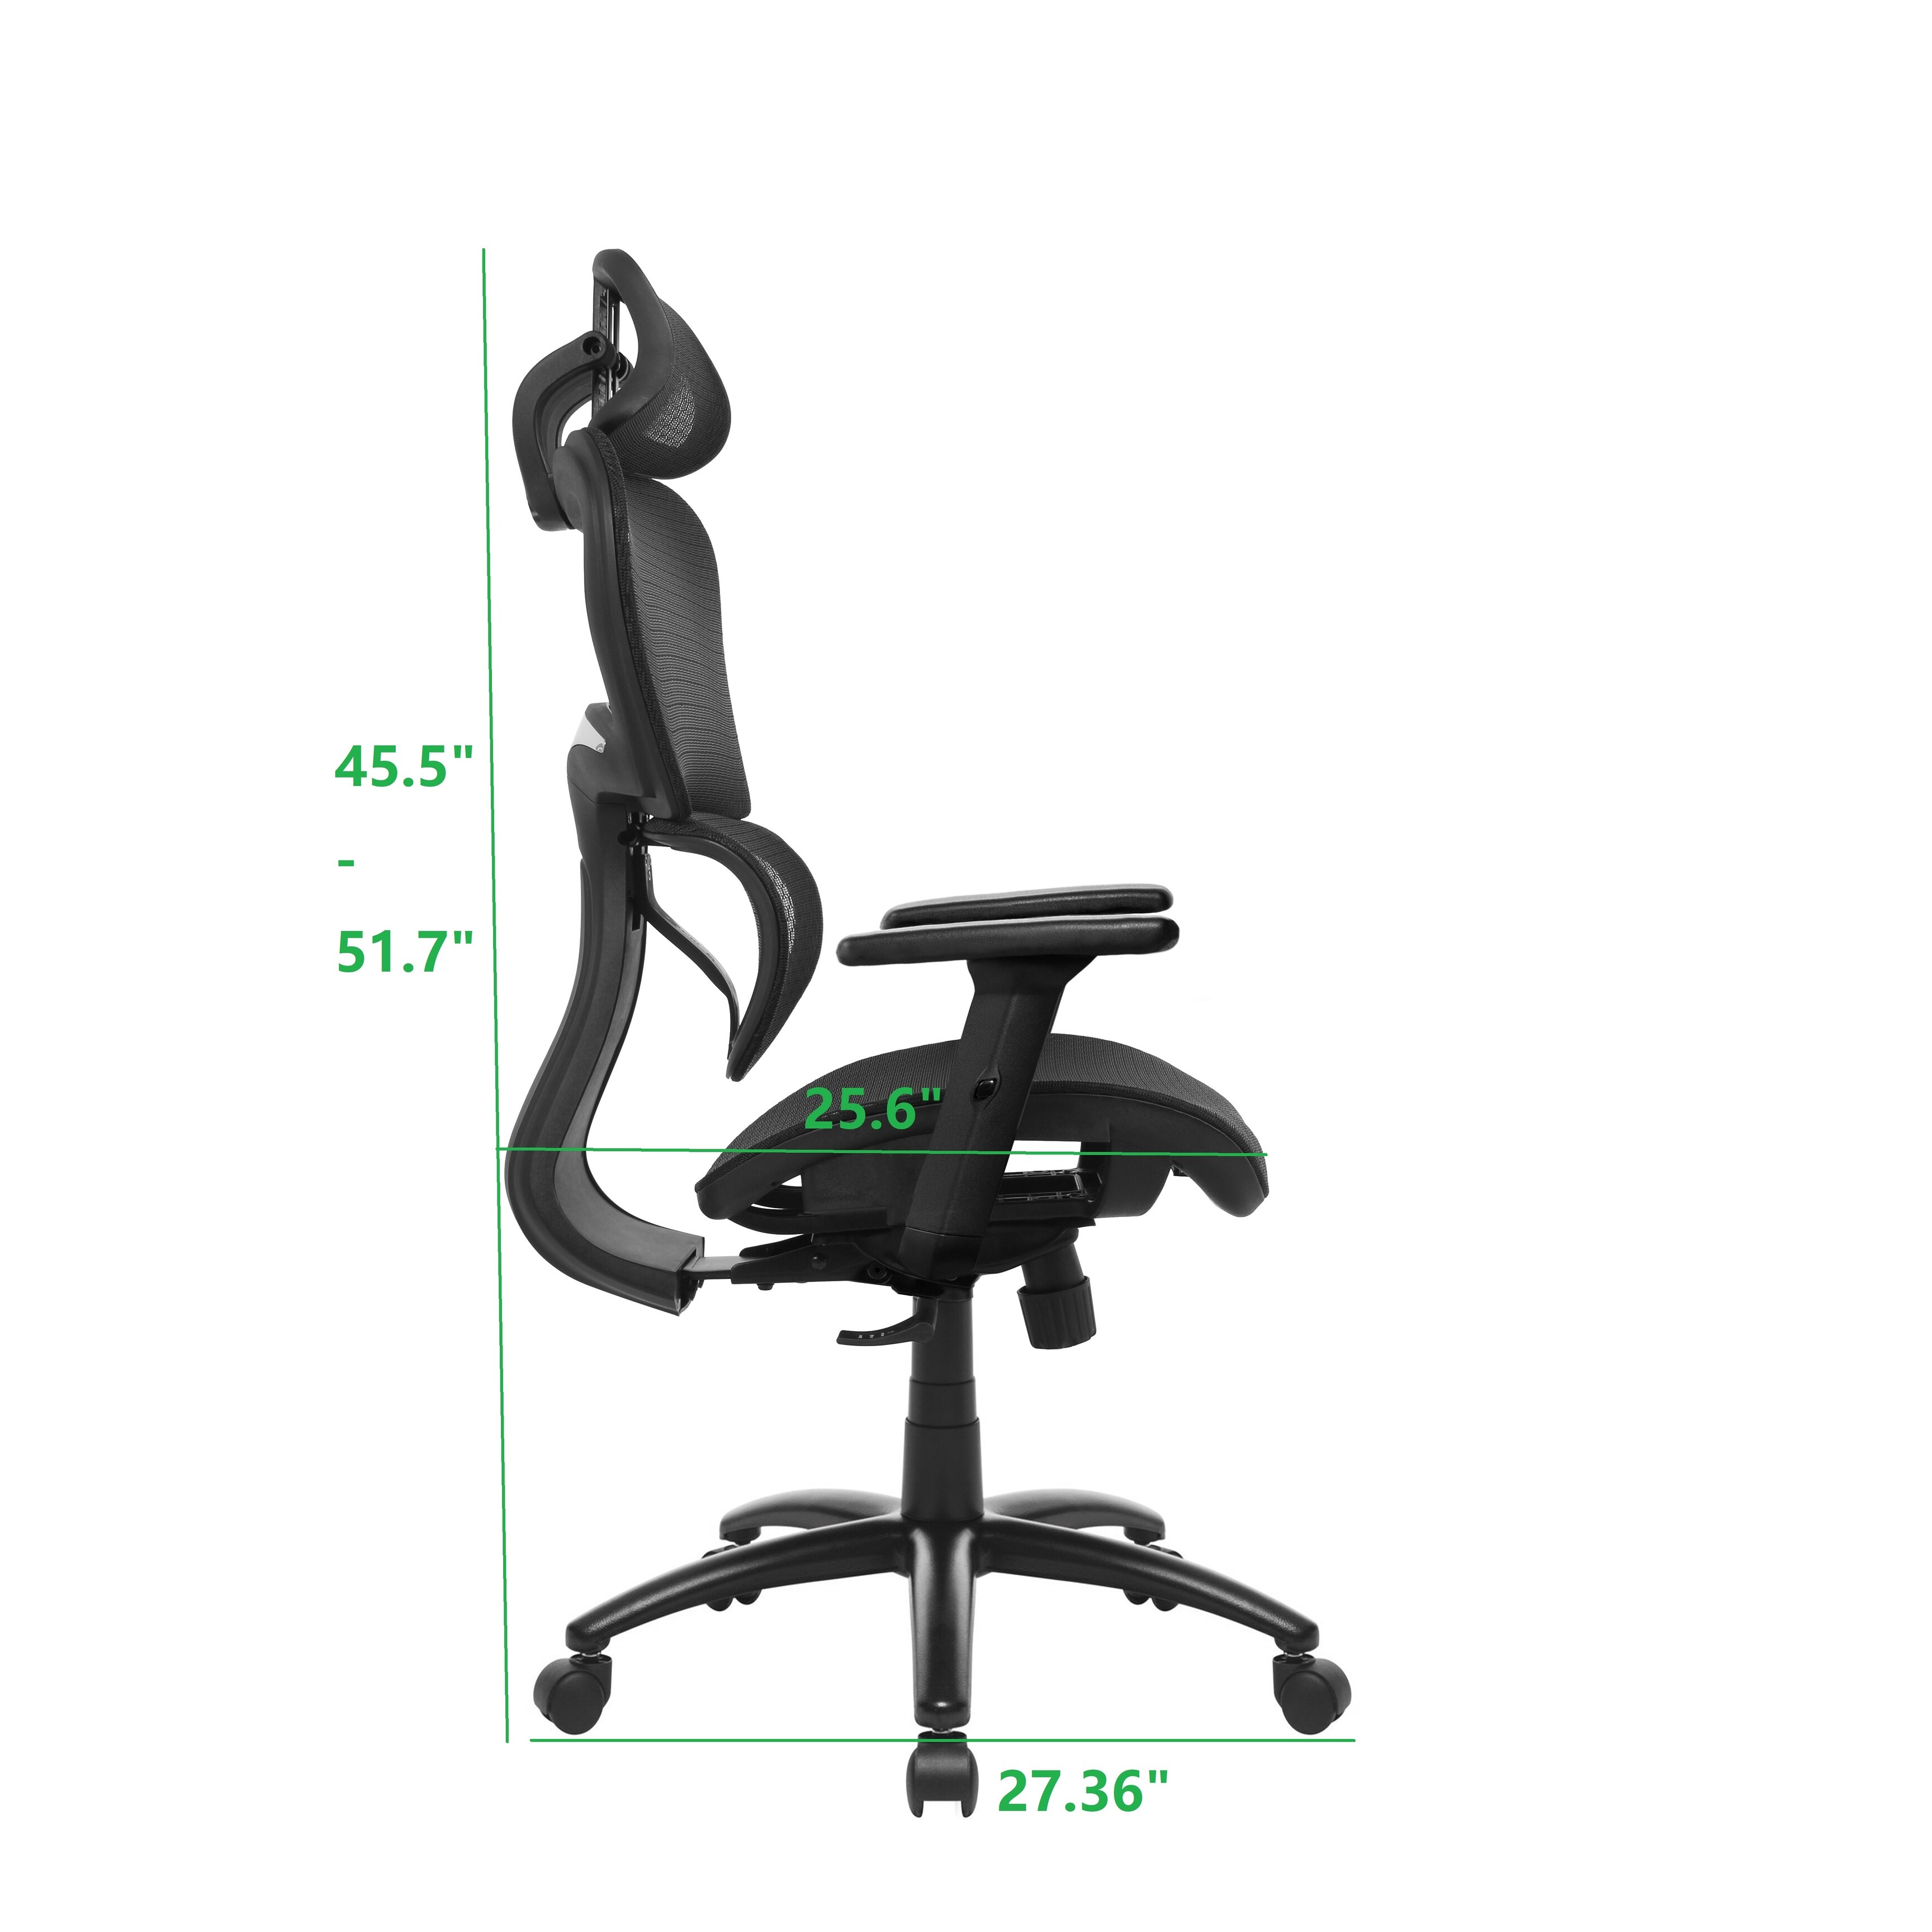 https://ak1.ostkcdn.com/images/products/is/images/direct/cf32d8e2acdbe26798bd71f9a081acc221c450db/Ergonomic-Office-Chair%2C-High-Back-Mesh-Chair-Computer-Desk-Chair-with-Lumbar-Support-and-3D-Adjustable-Headrest-and-Armrests.jpg